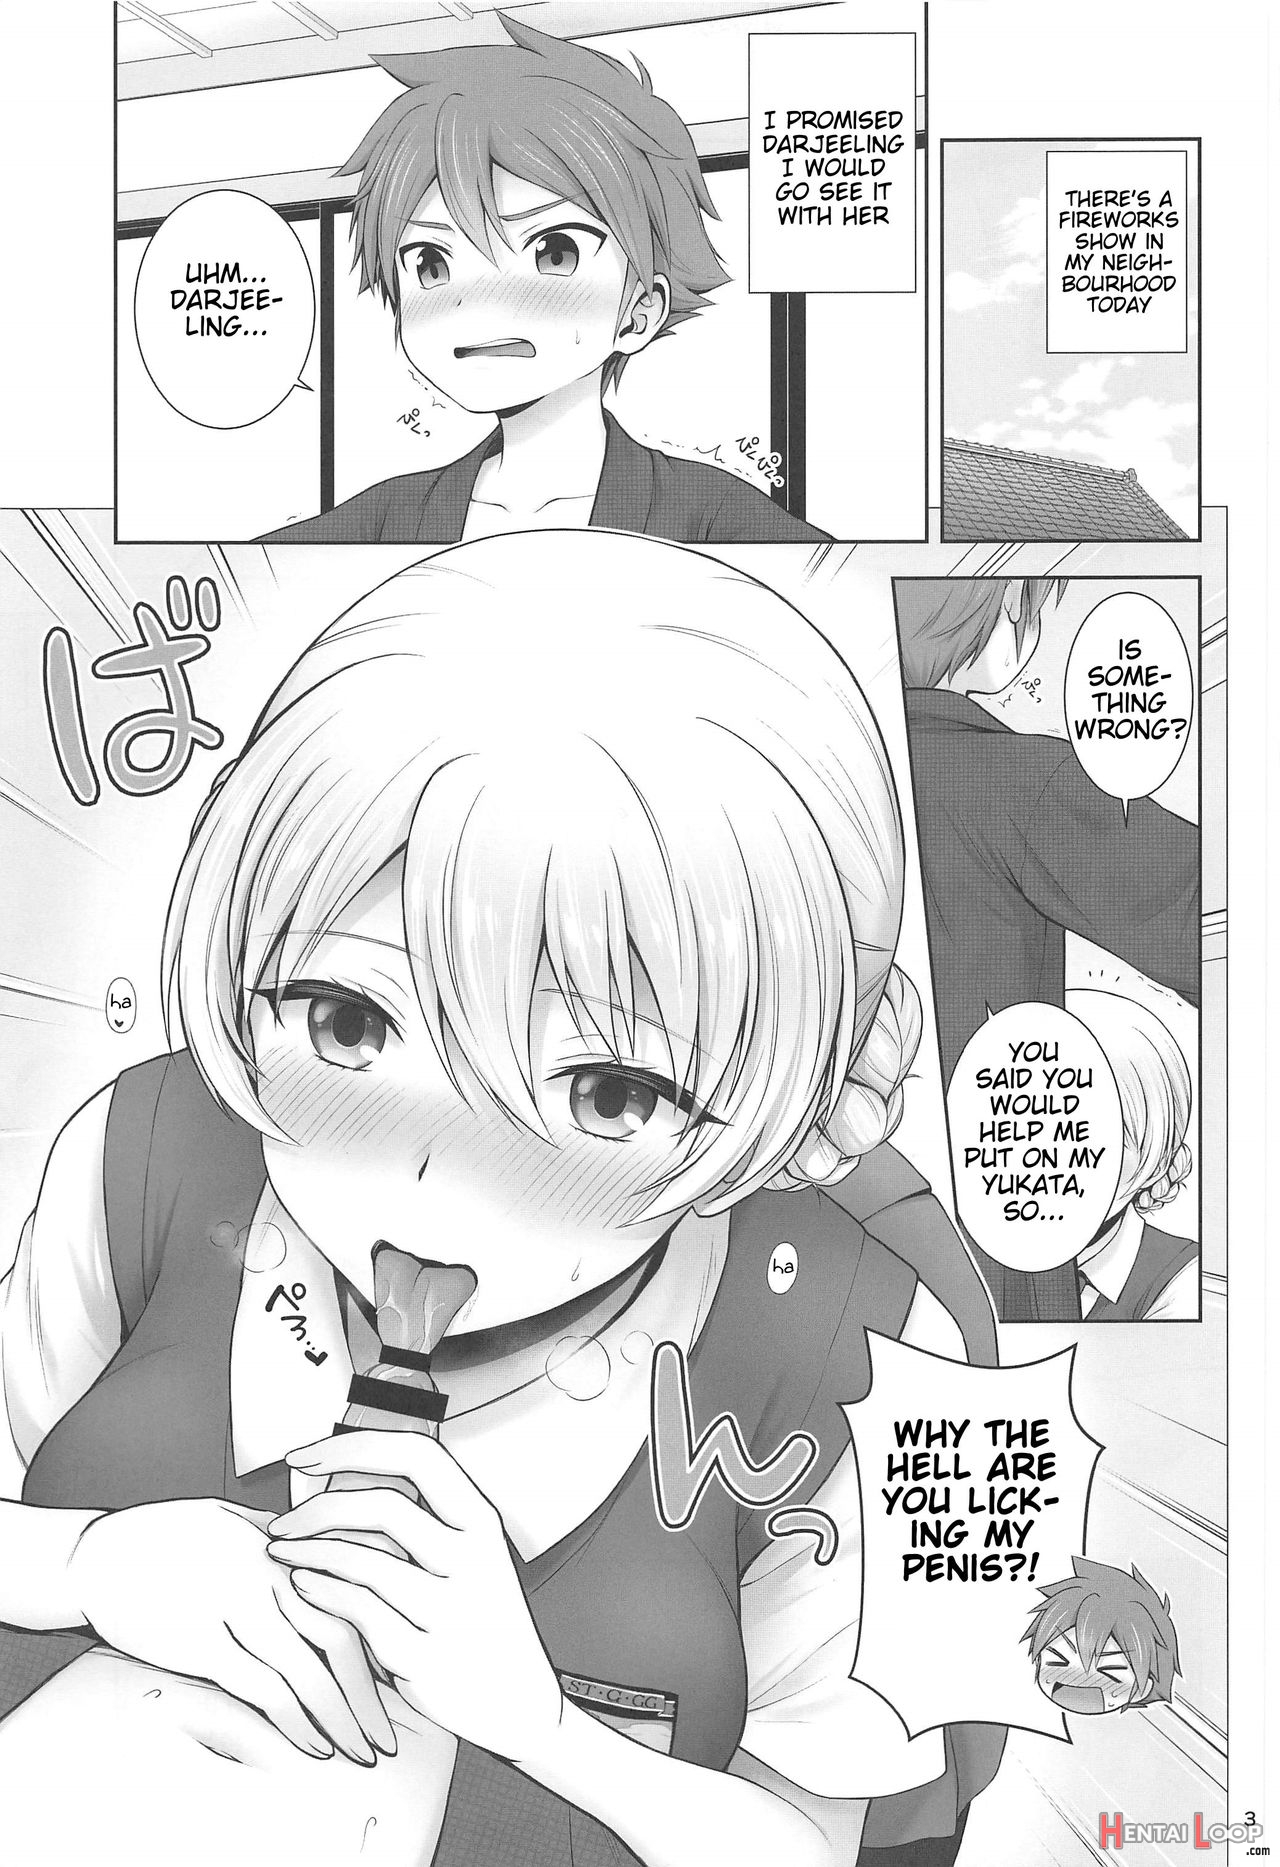 Darjeeling And Love Fireworks page 3